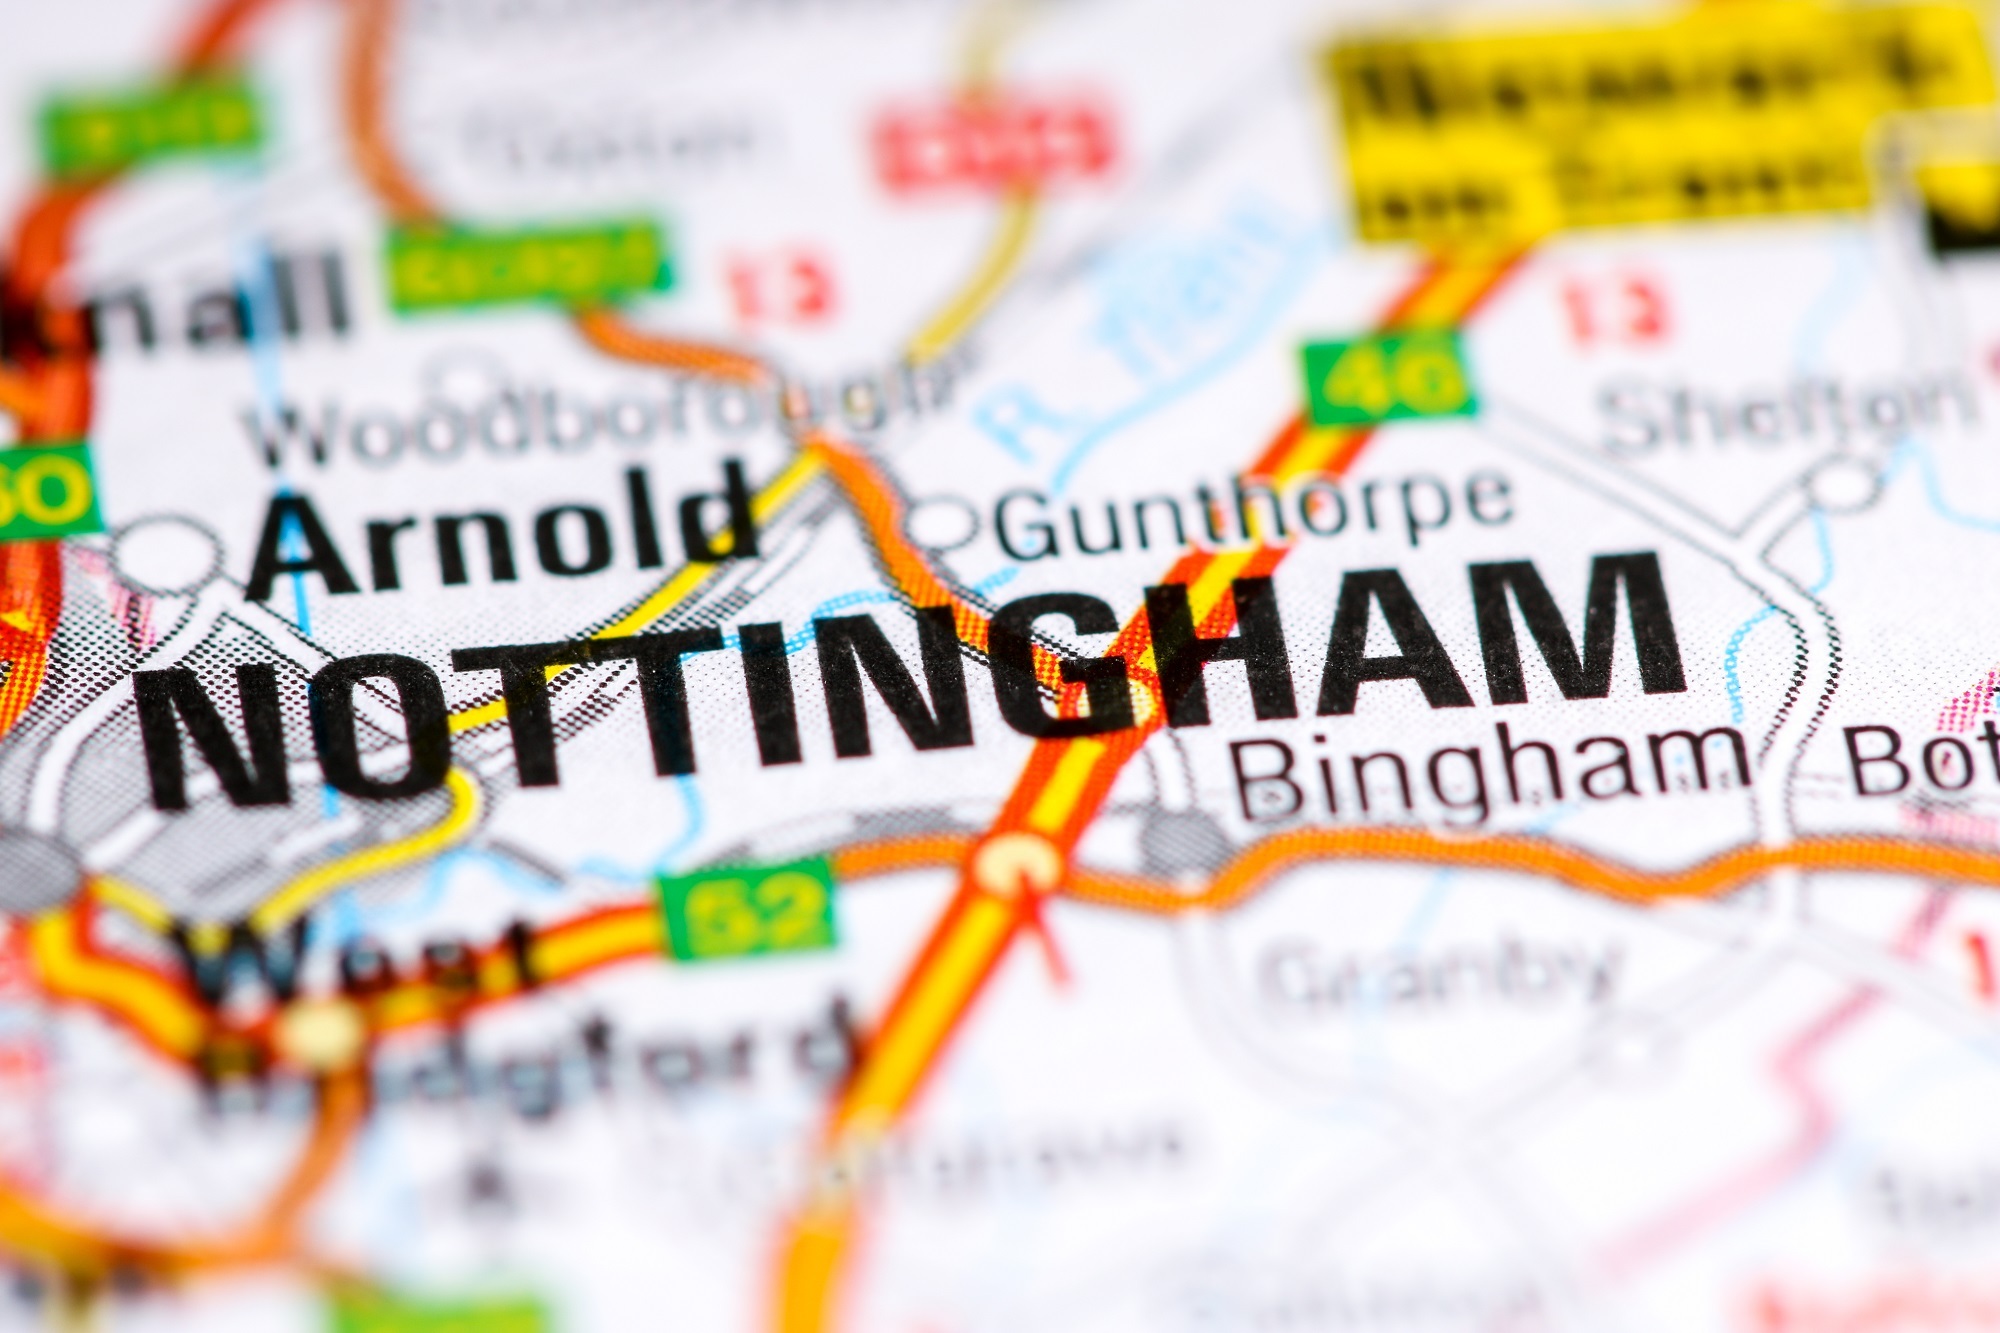 Nottingham: Your complete area guide